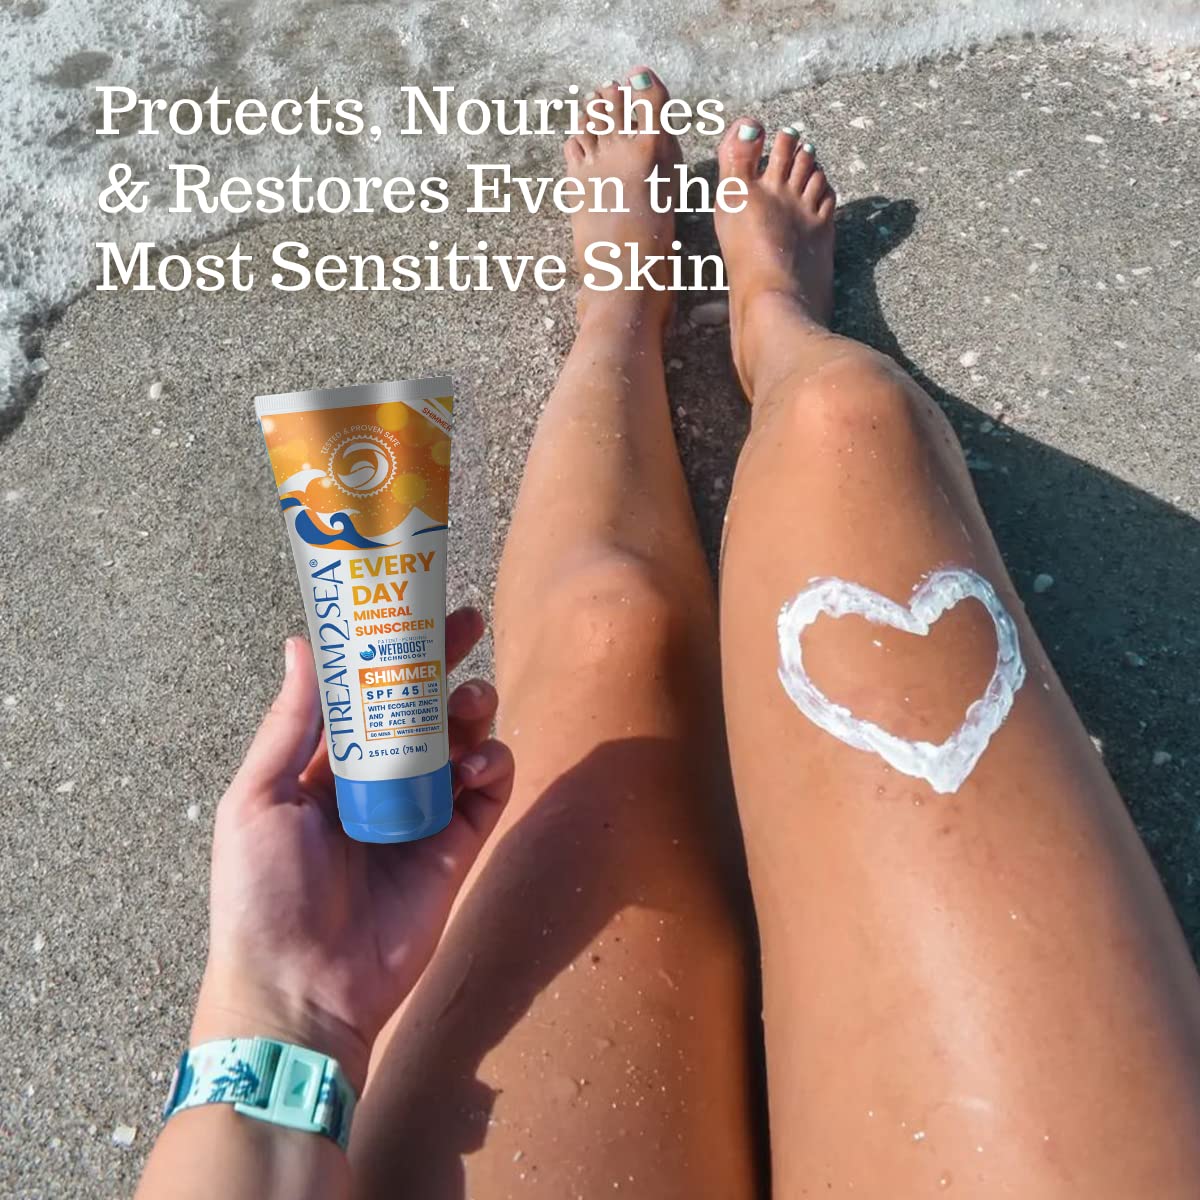 SPF 45 Every Day Shimmer Mineral Sunscreen | 2.5 Fl Oz Biodegradable, Paraben Free & Reef Safe Sunscreen | Non-Greasy, Lightweight & Shimmer Mineral Protection Against UVA & UVB for Face & Body : Beauty & Personal Care